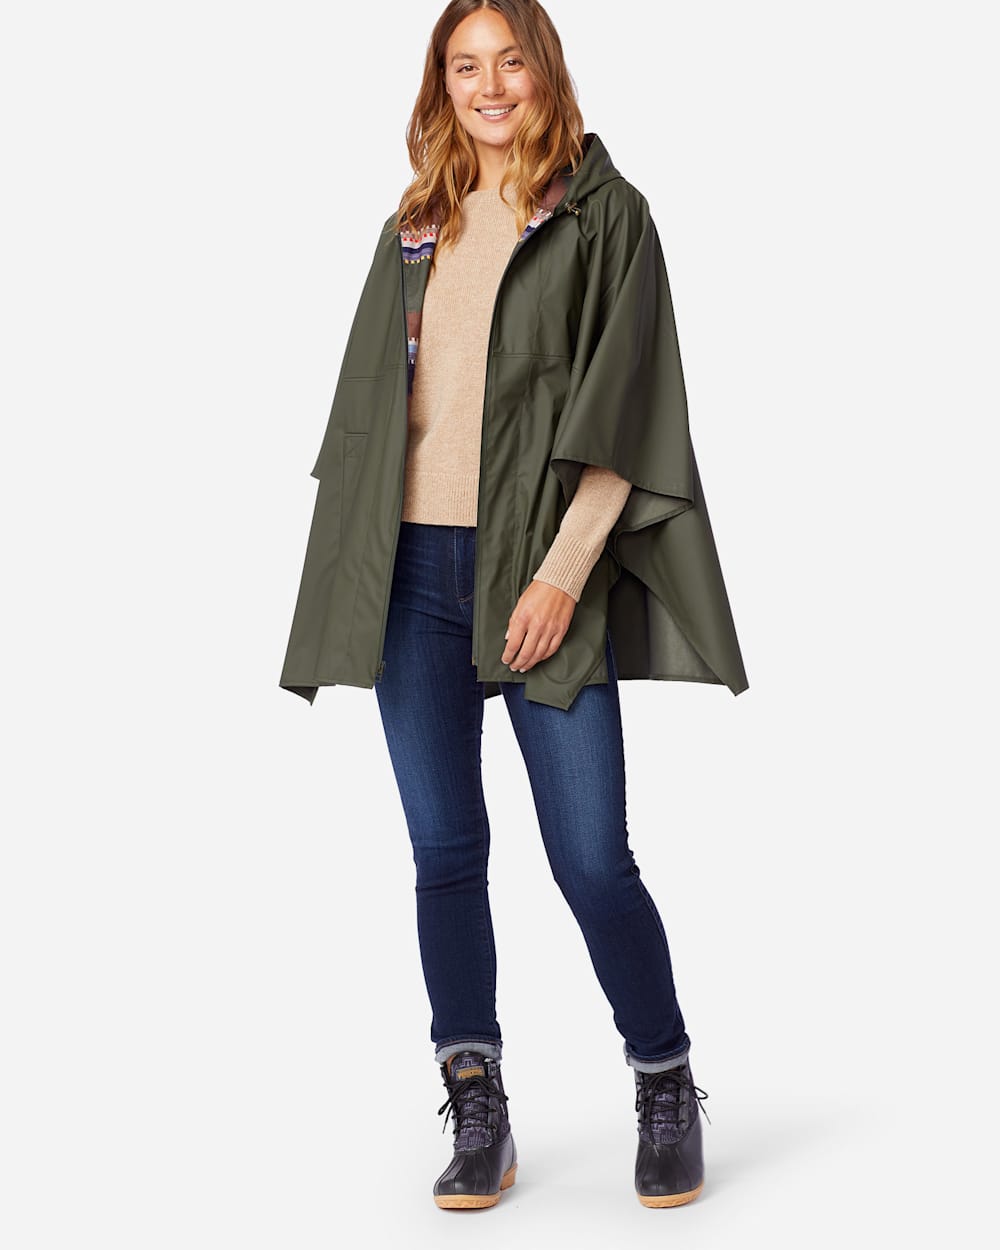 ALTERNATE VIEW OF WOMEN'S ZIP FRONT RAIN PONCHO IN OLIVE image number 5